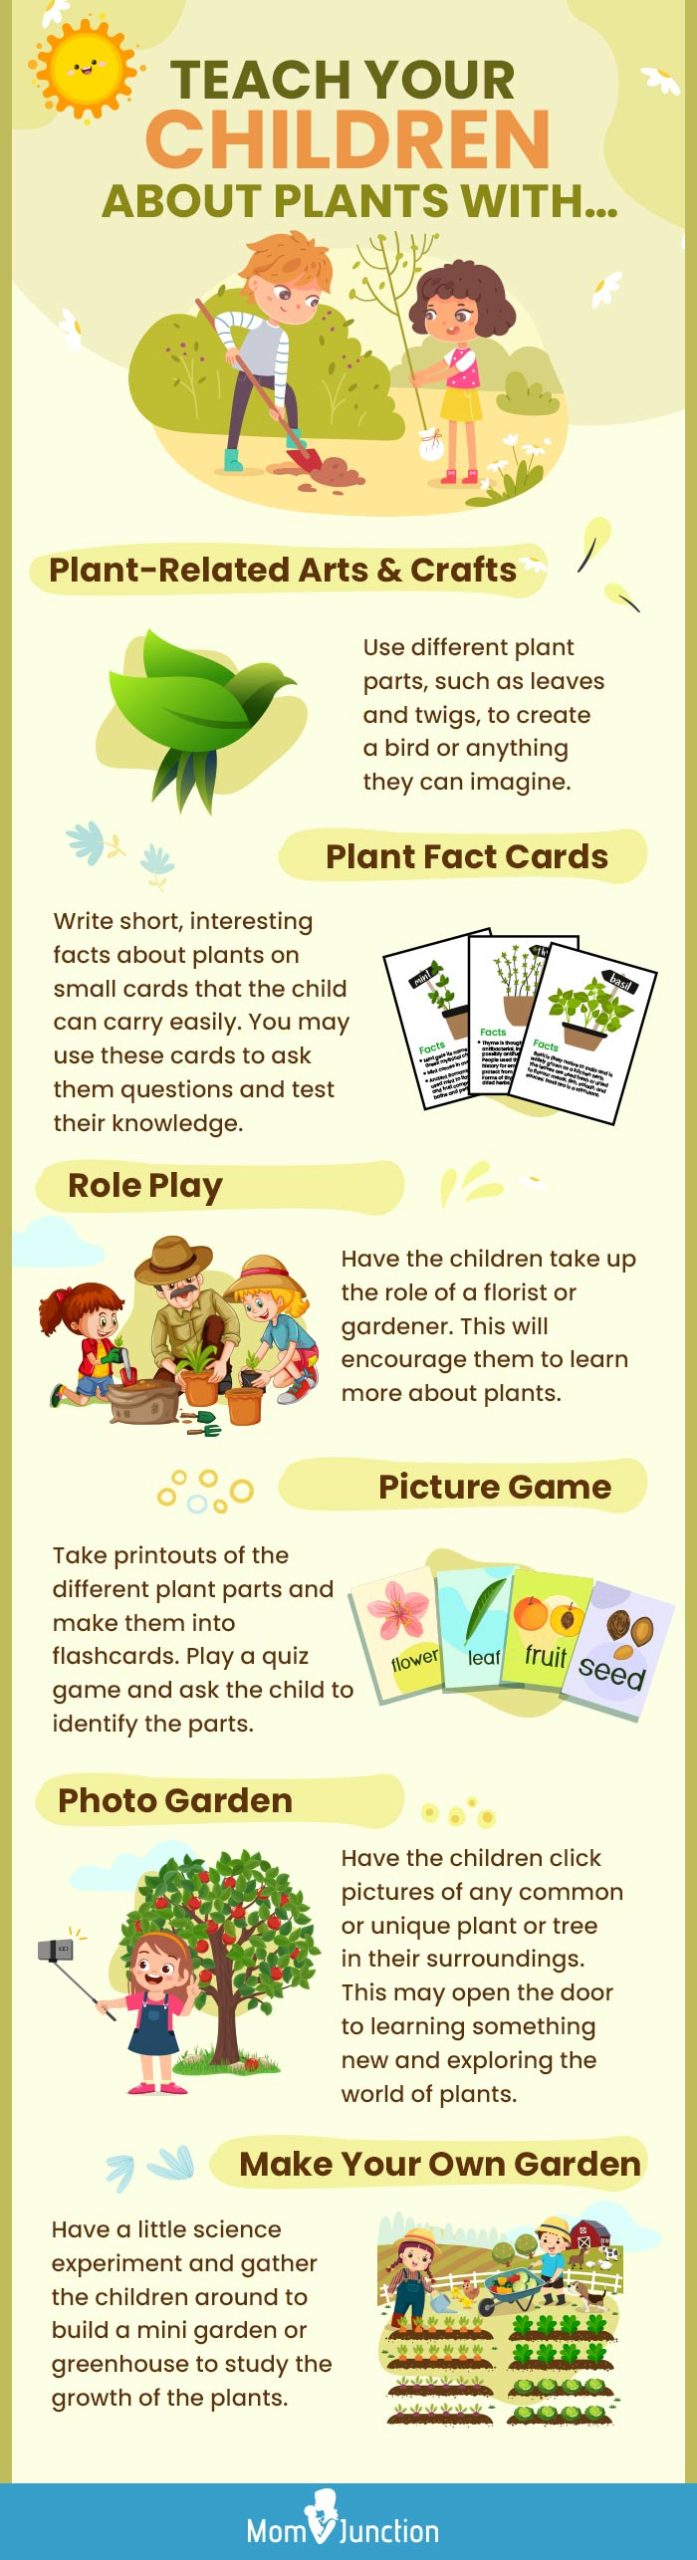 teach your children about plants (infographic)